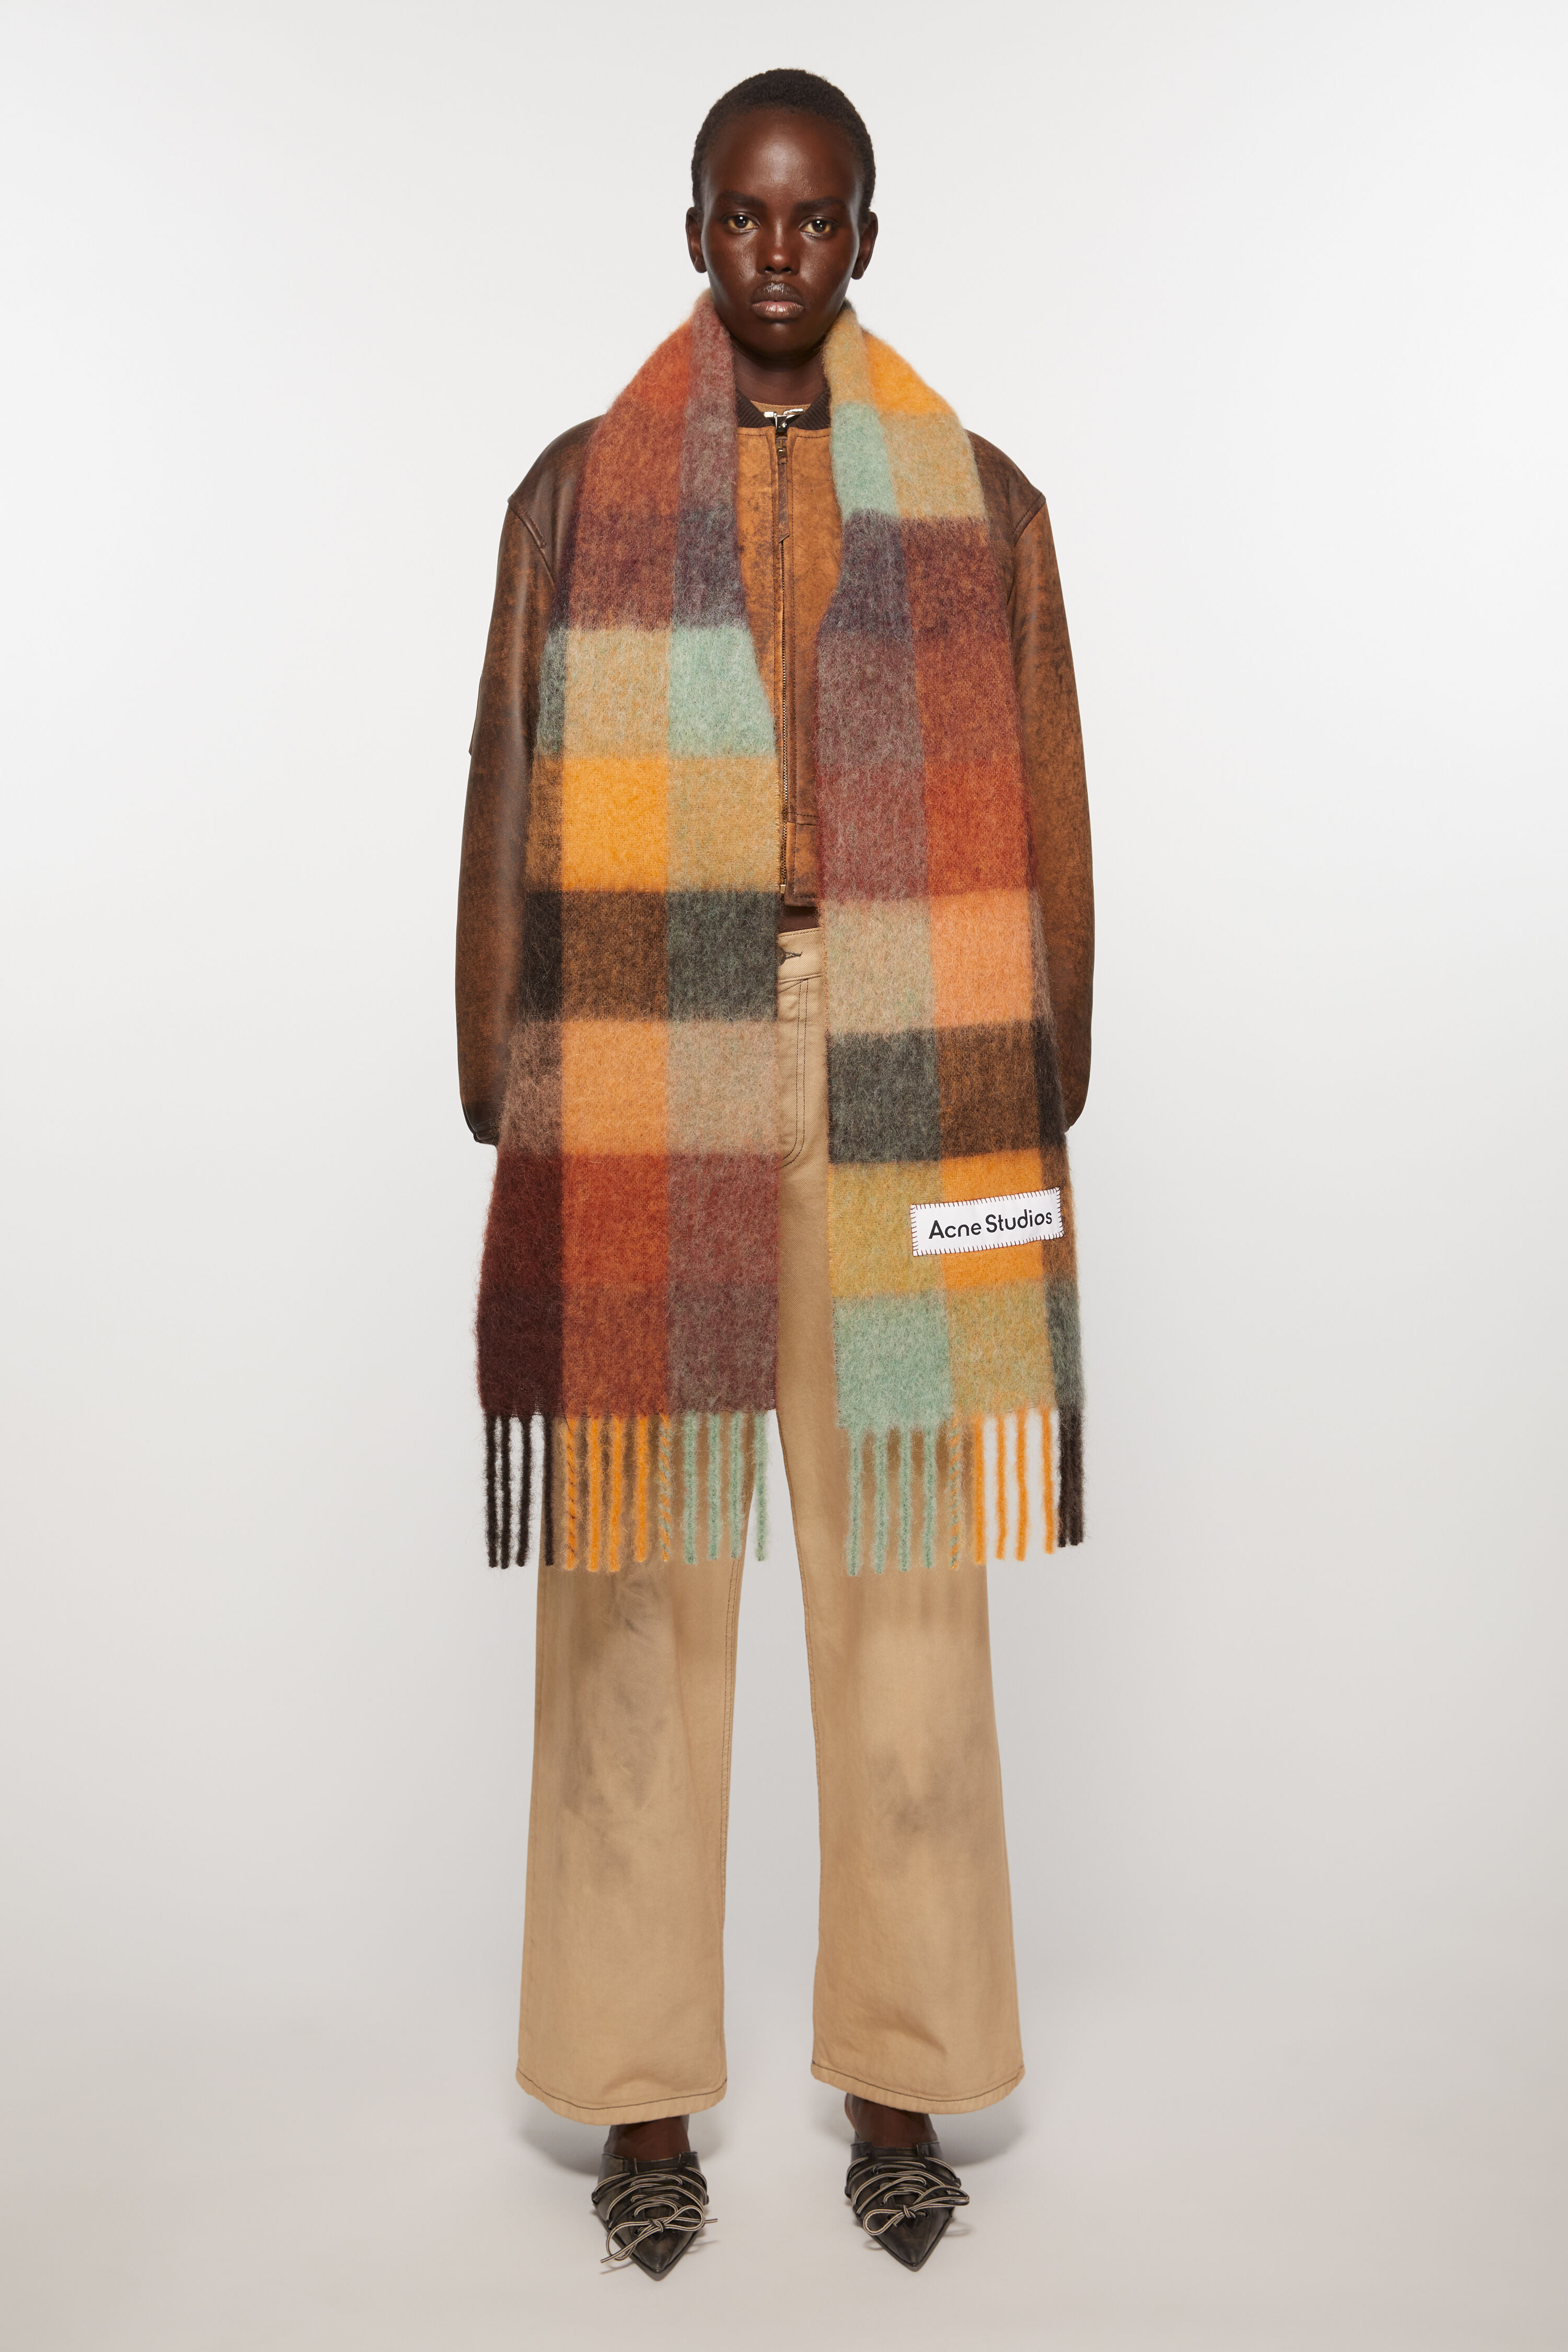 Acne Studios - Mohair checked scarf - Chestnut brown/yellow/green